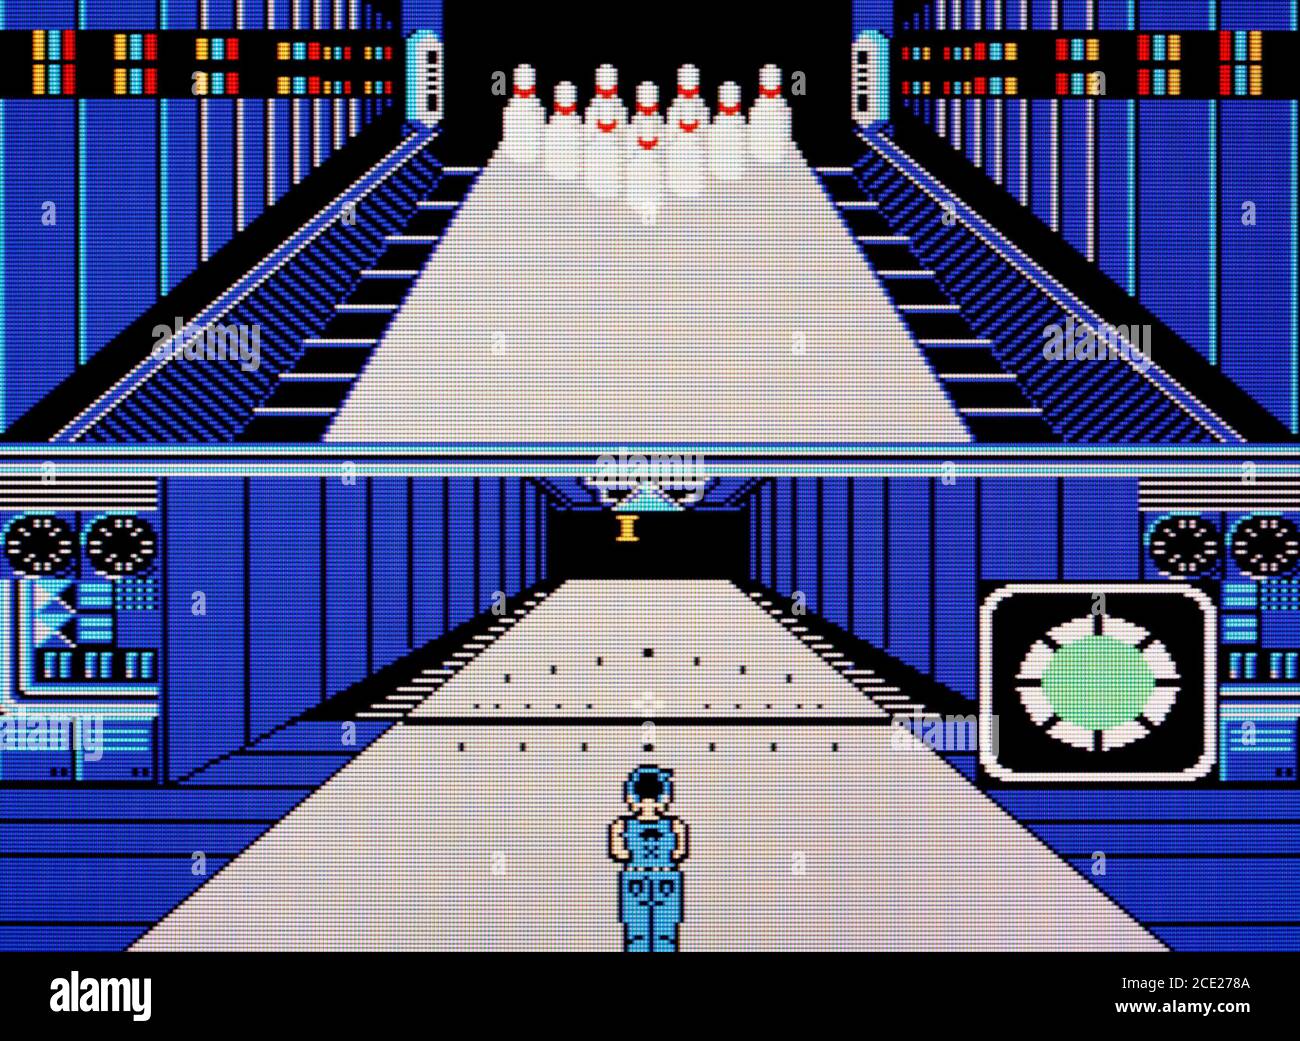 Bowling - Nintendo Entertainment System - NES Videogame - Editorial use only Stock Photo